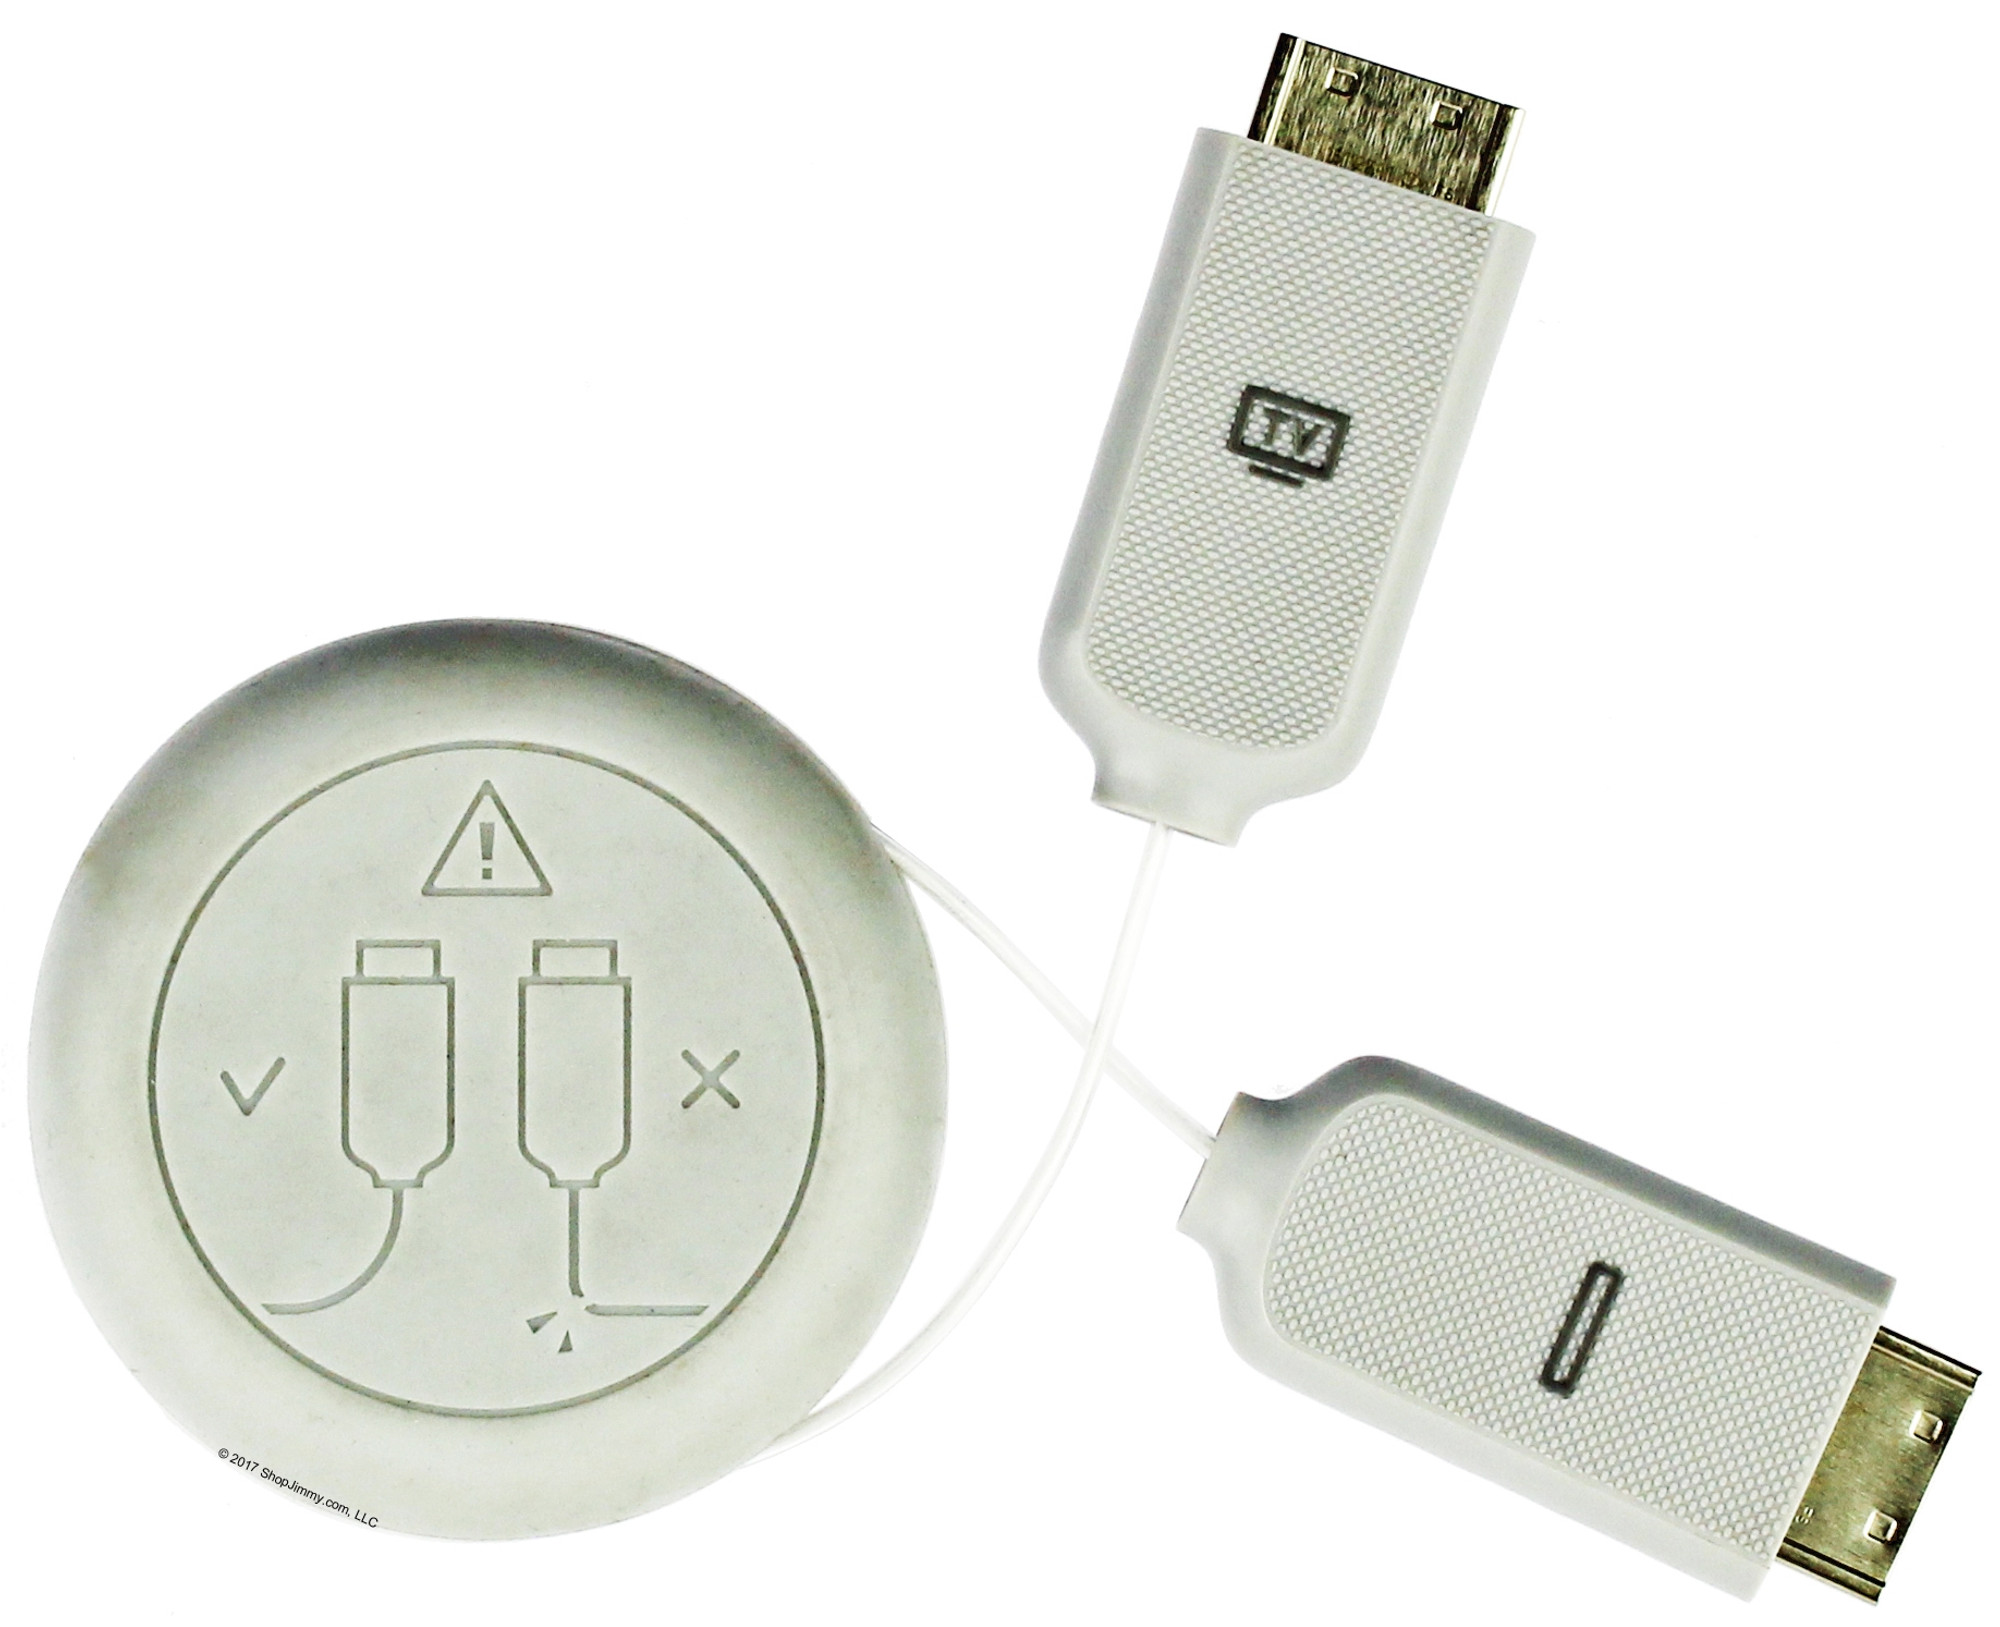 Samsung OCB – One Connect Box and one clear cable